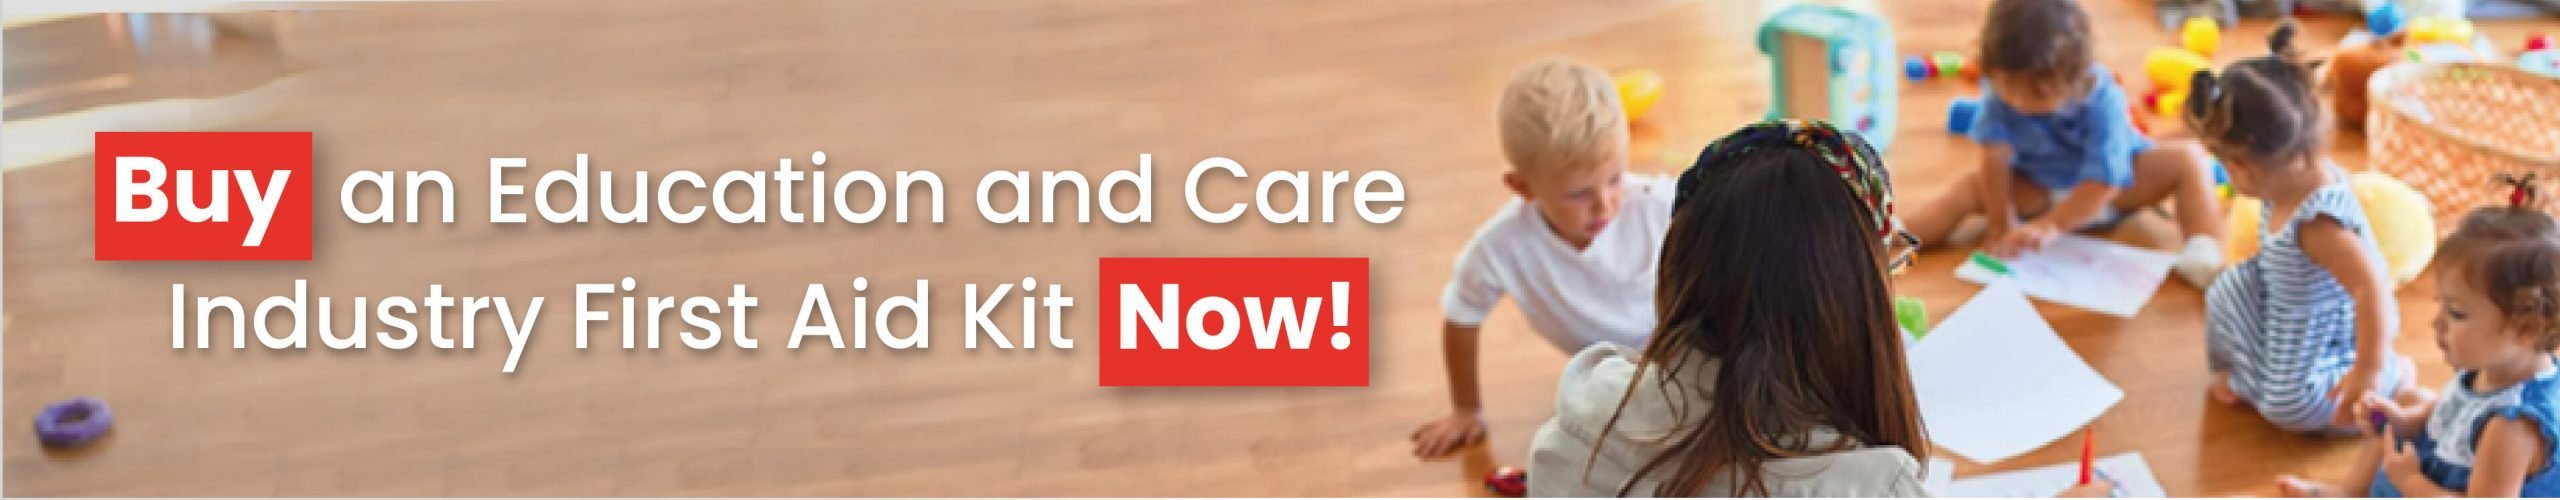 Buy an Education and Care Industry First Aid Kit Now!